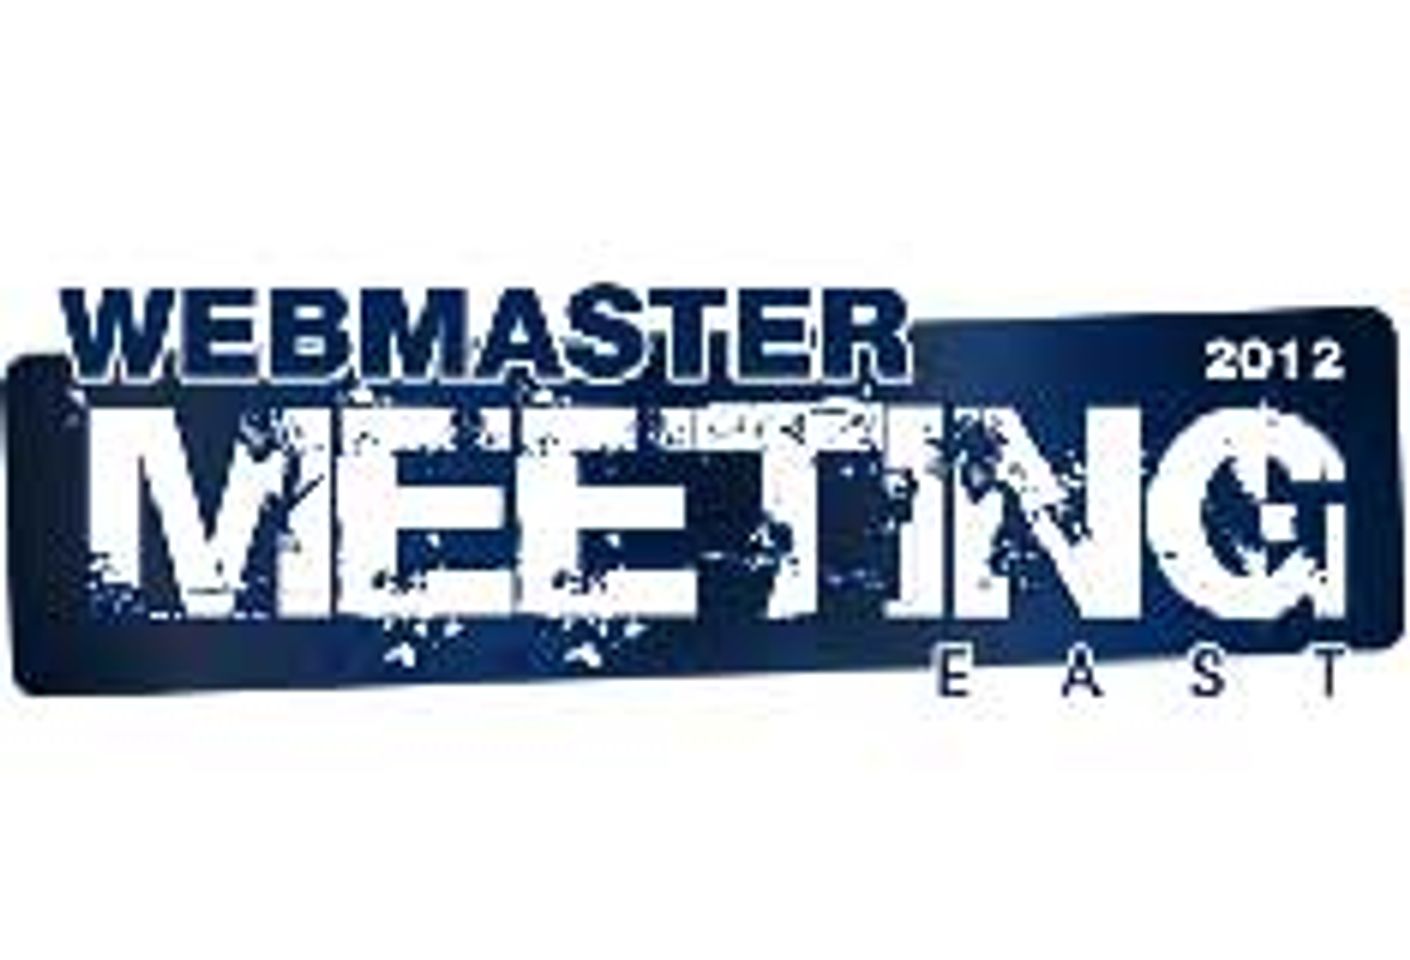 2nd Webmaster Meeting East Set for Oct. 15 in Brno, Czech Rep.